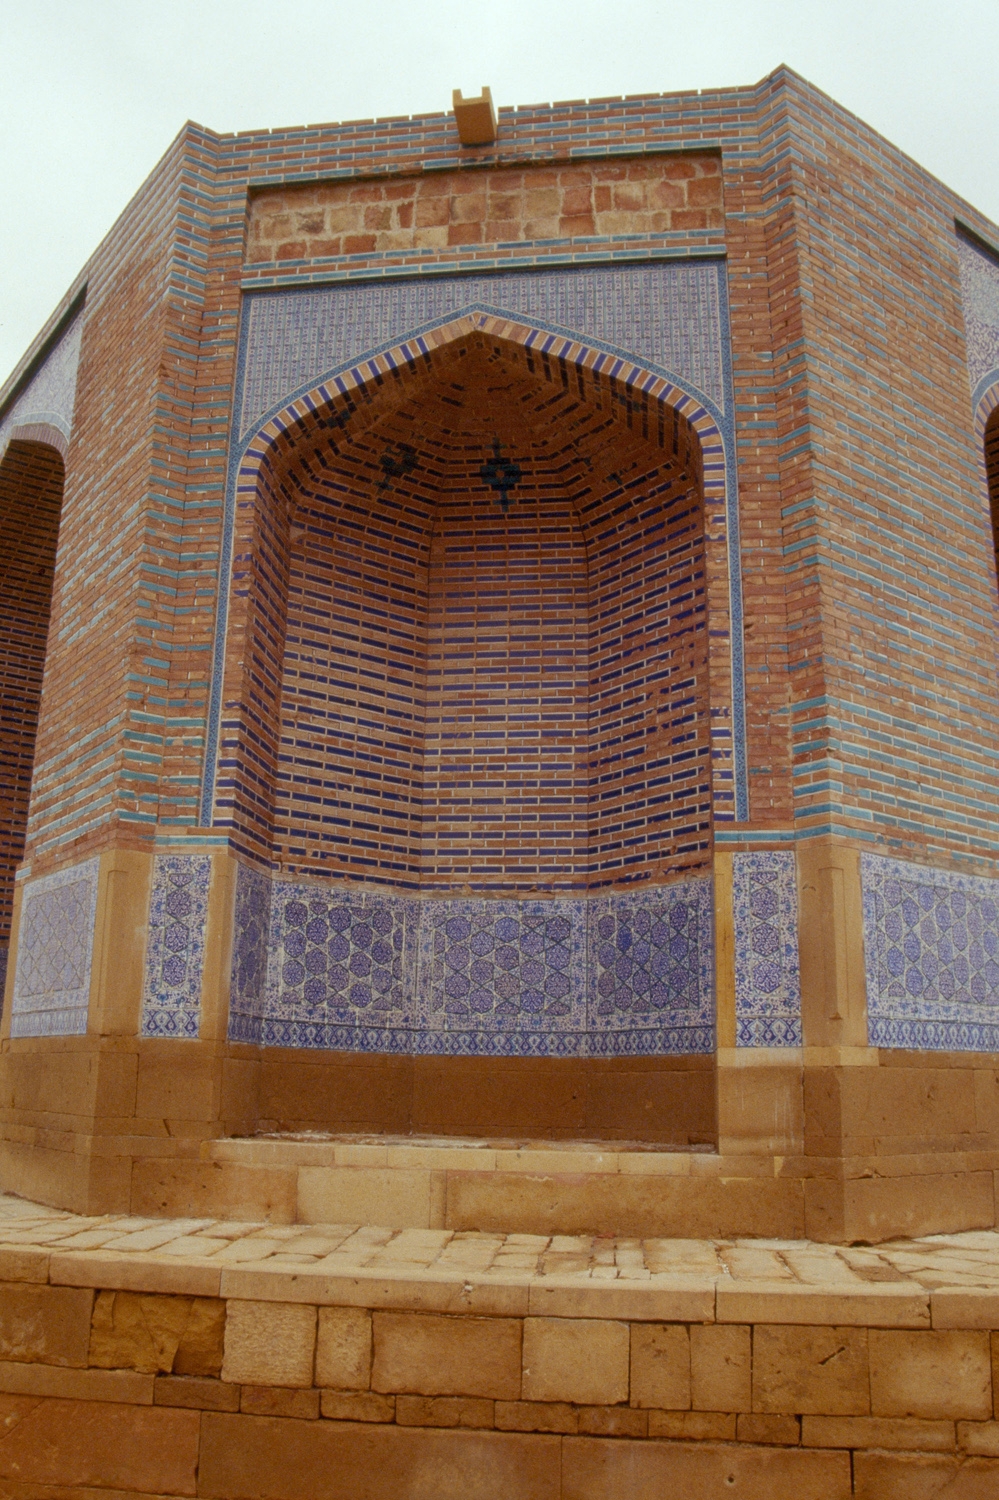 Semi-domed recess decorated with blue tiles